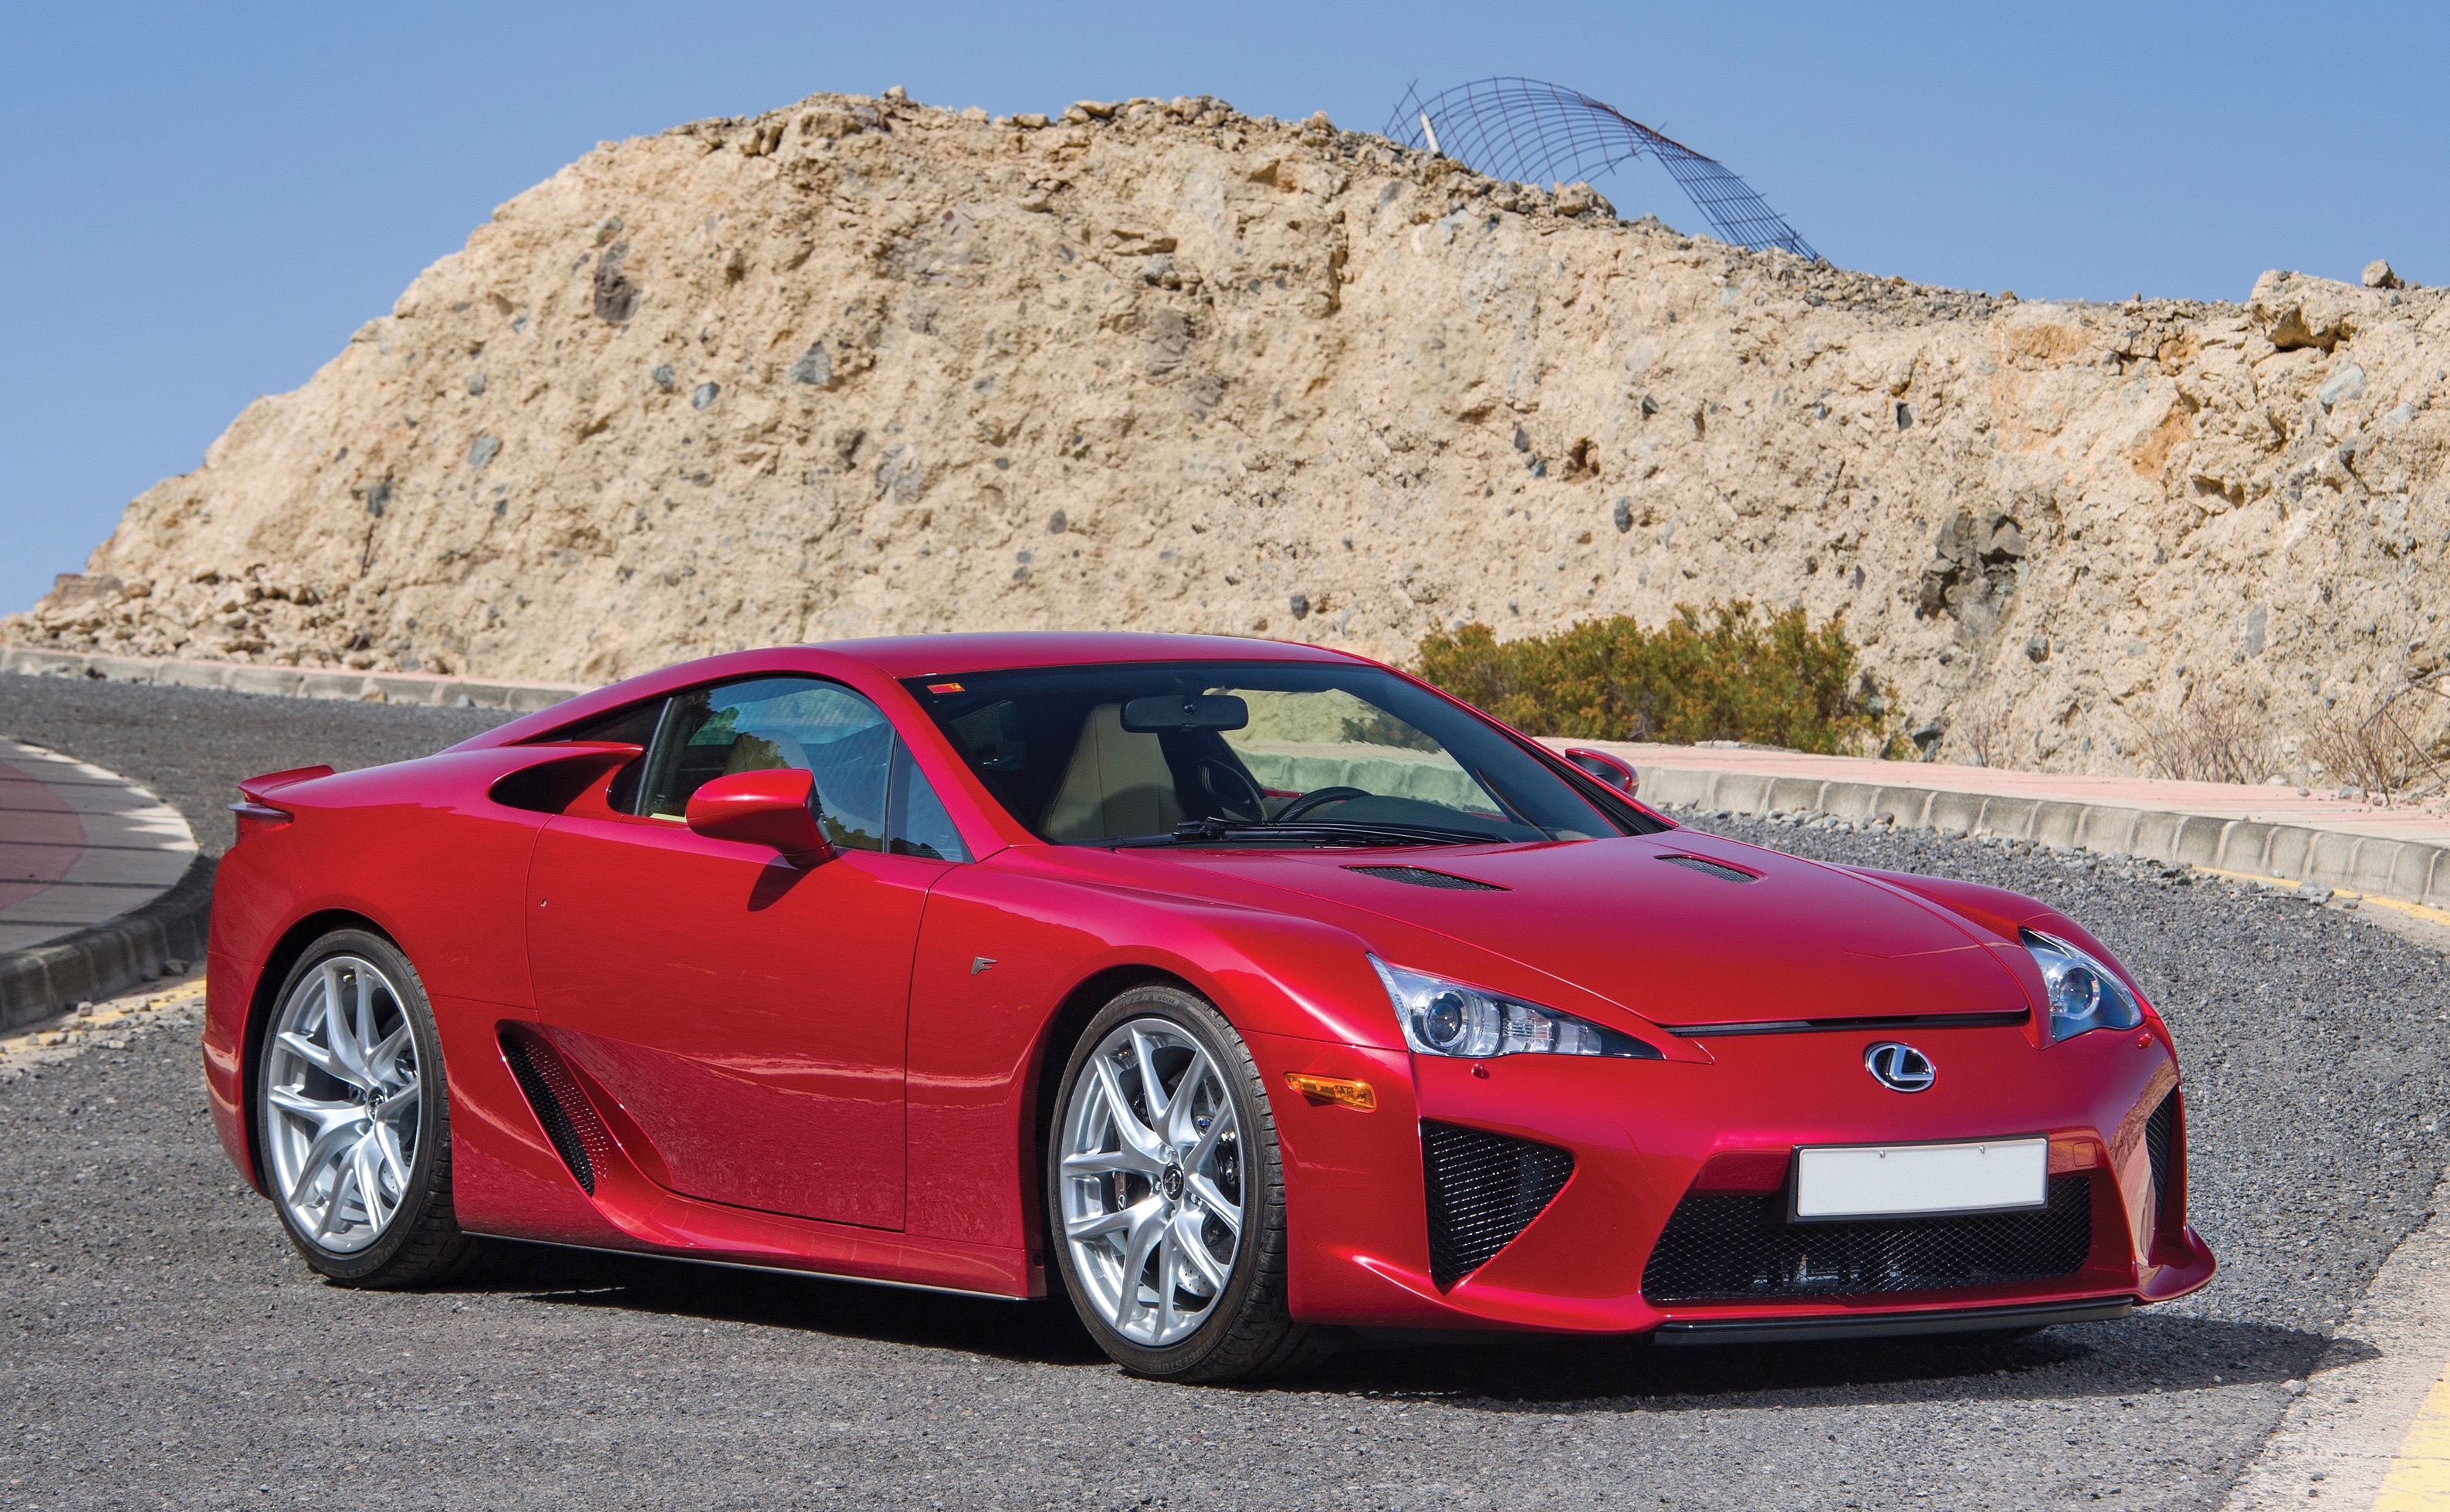 Lexus Lfa Buy It Now While It S Still Affordable Classiccars